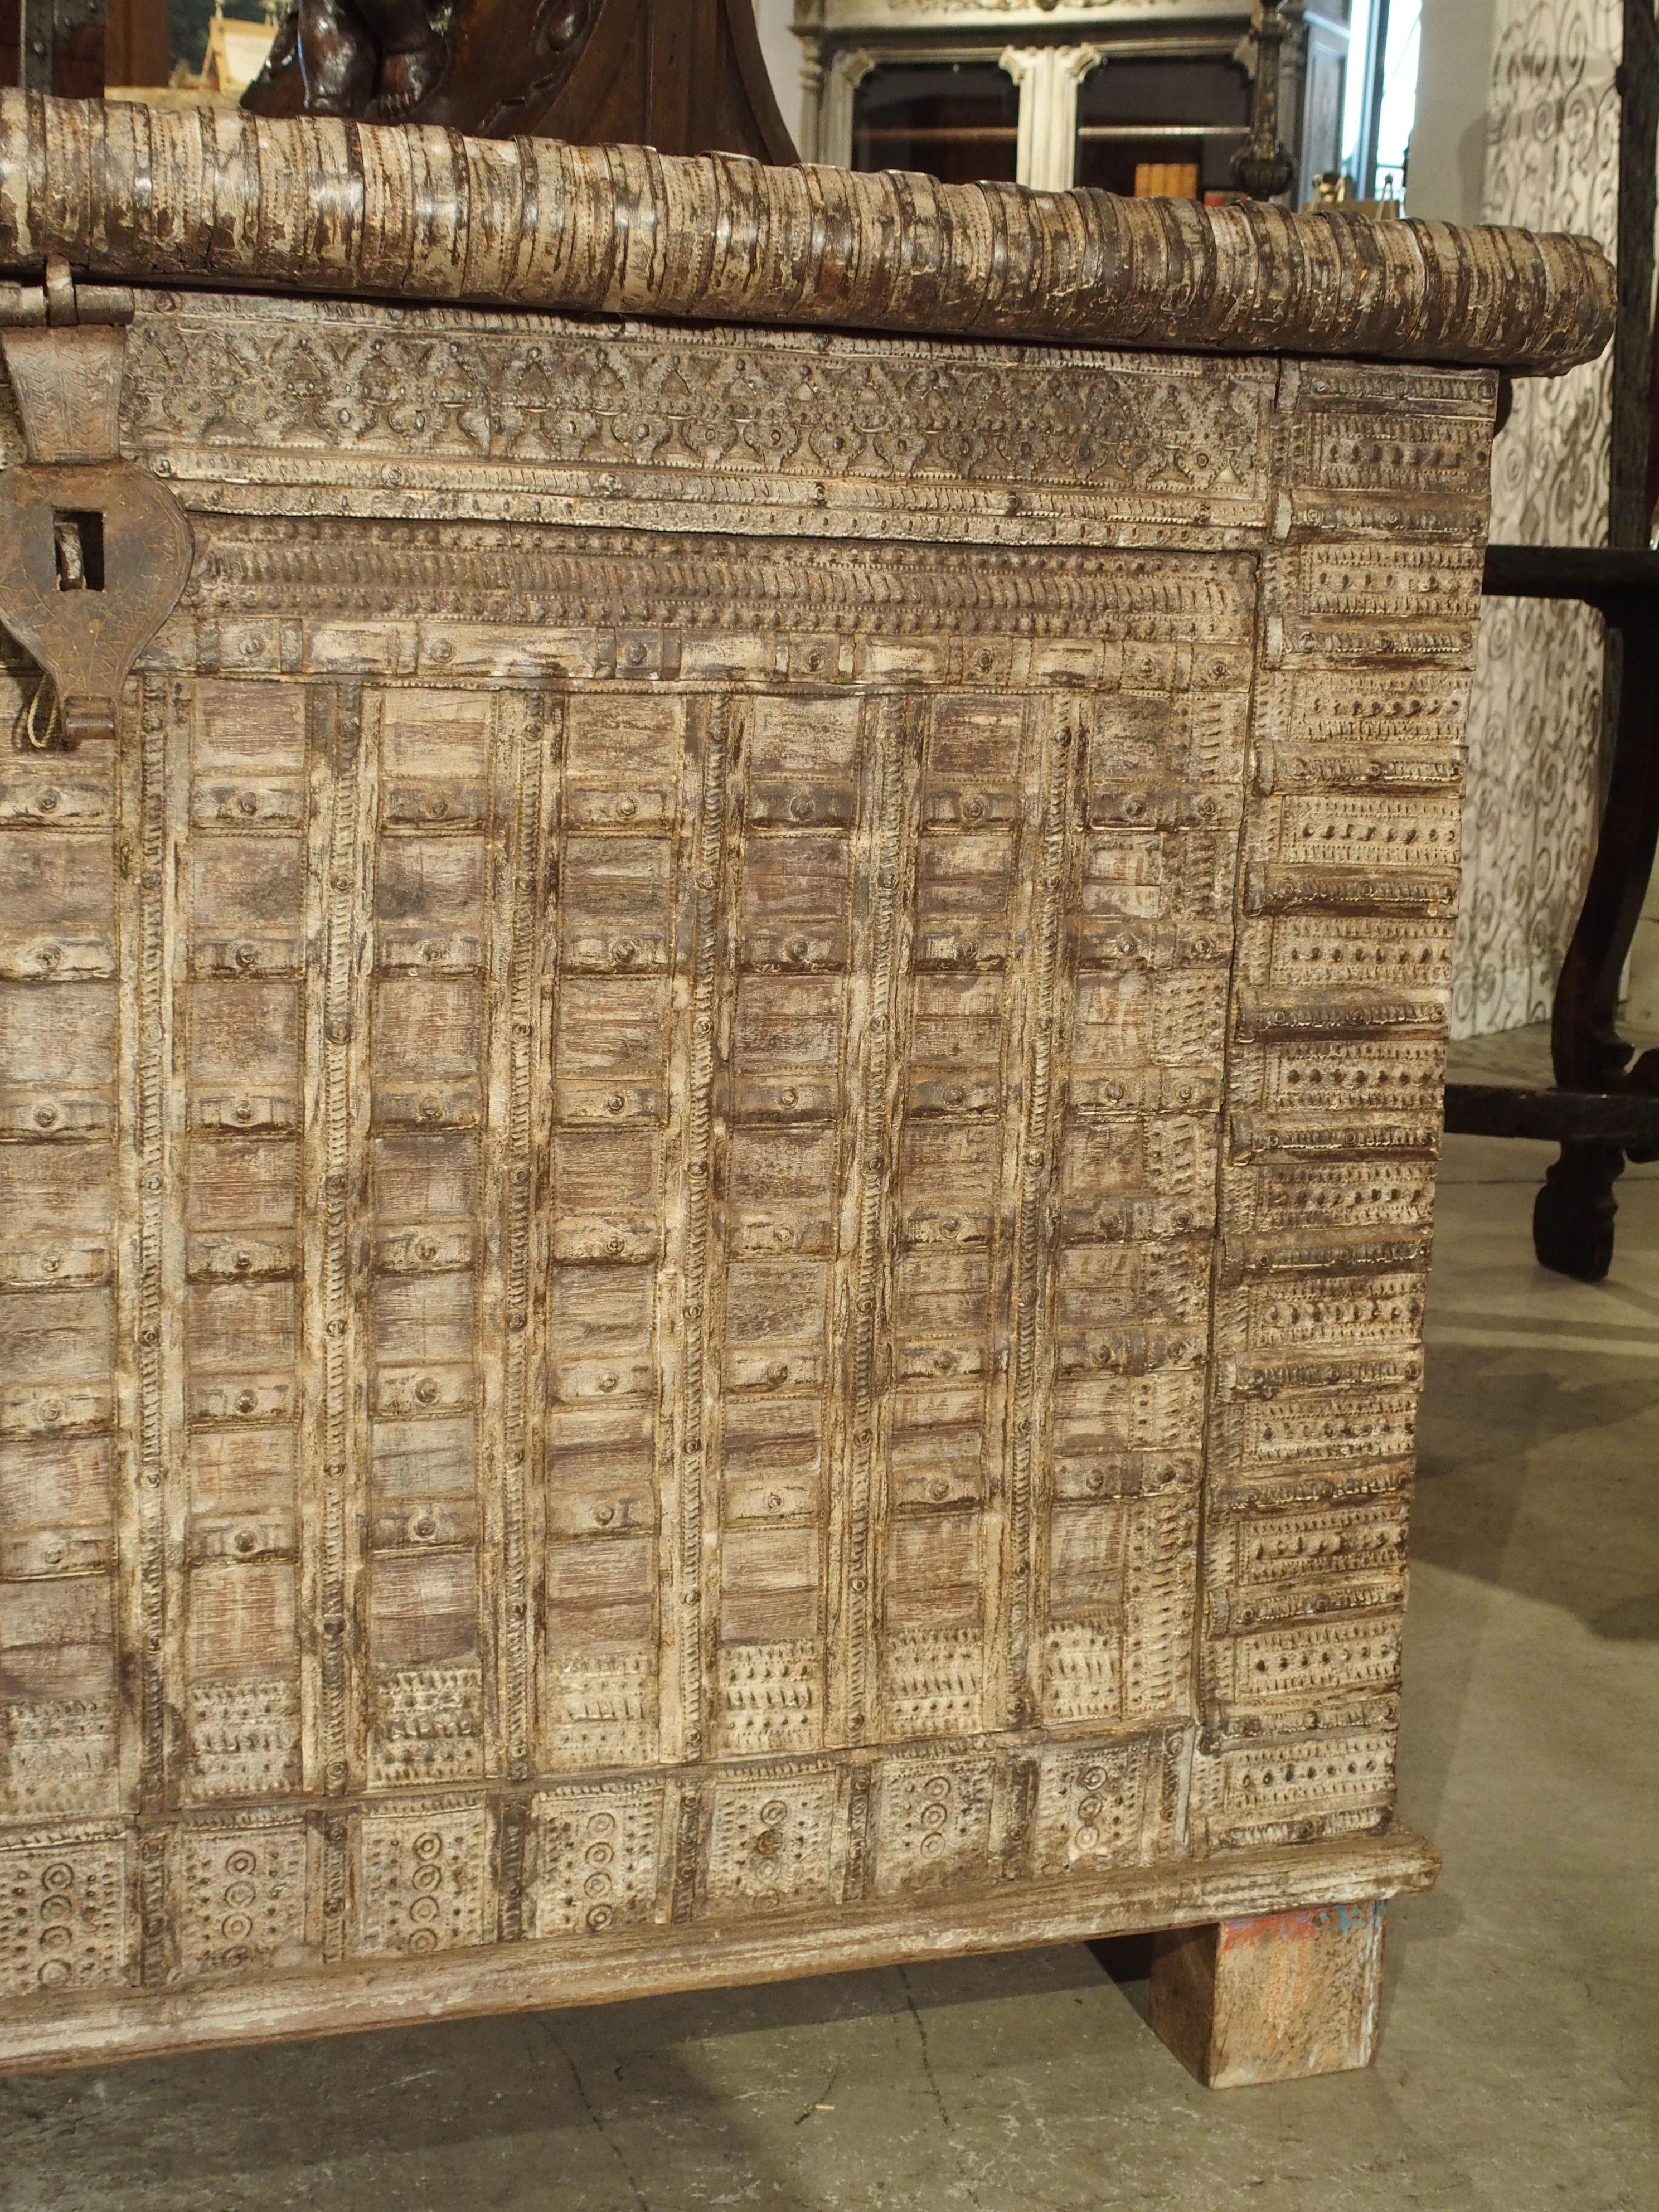 This large iron and whitewashed wooden trunk from India has been made with antique elements. It is the perfect height for use as a serving piece, console or storage trunk. Whitewashing the trunk gives it an overall uniformity, yet shows there is